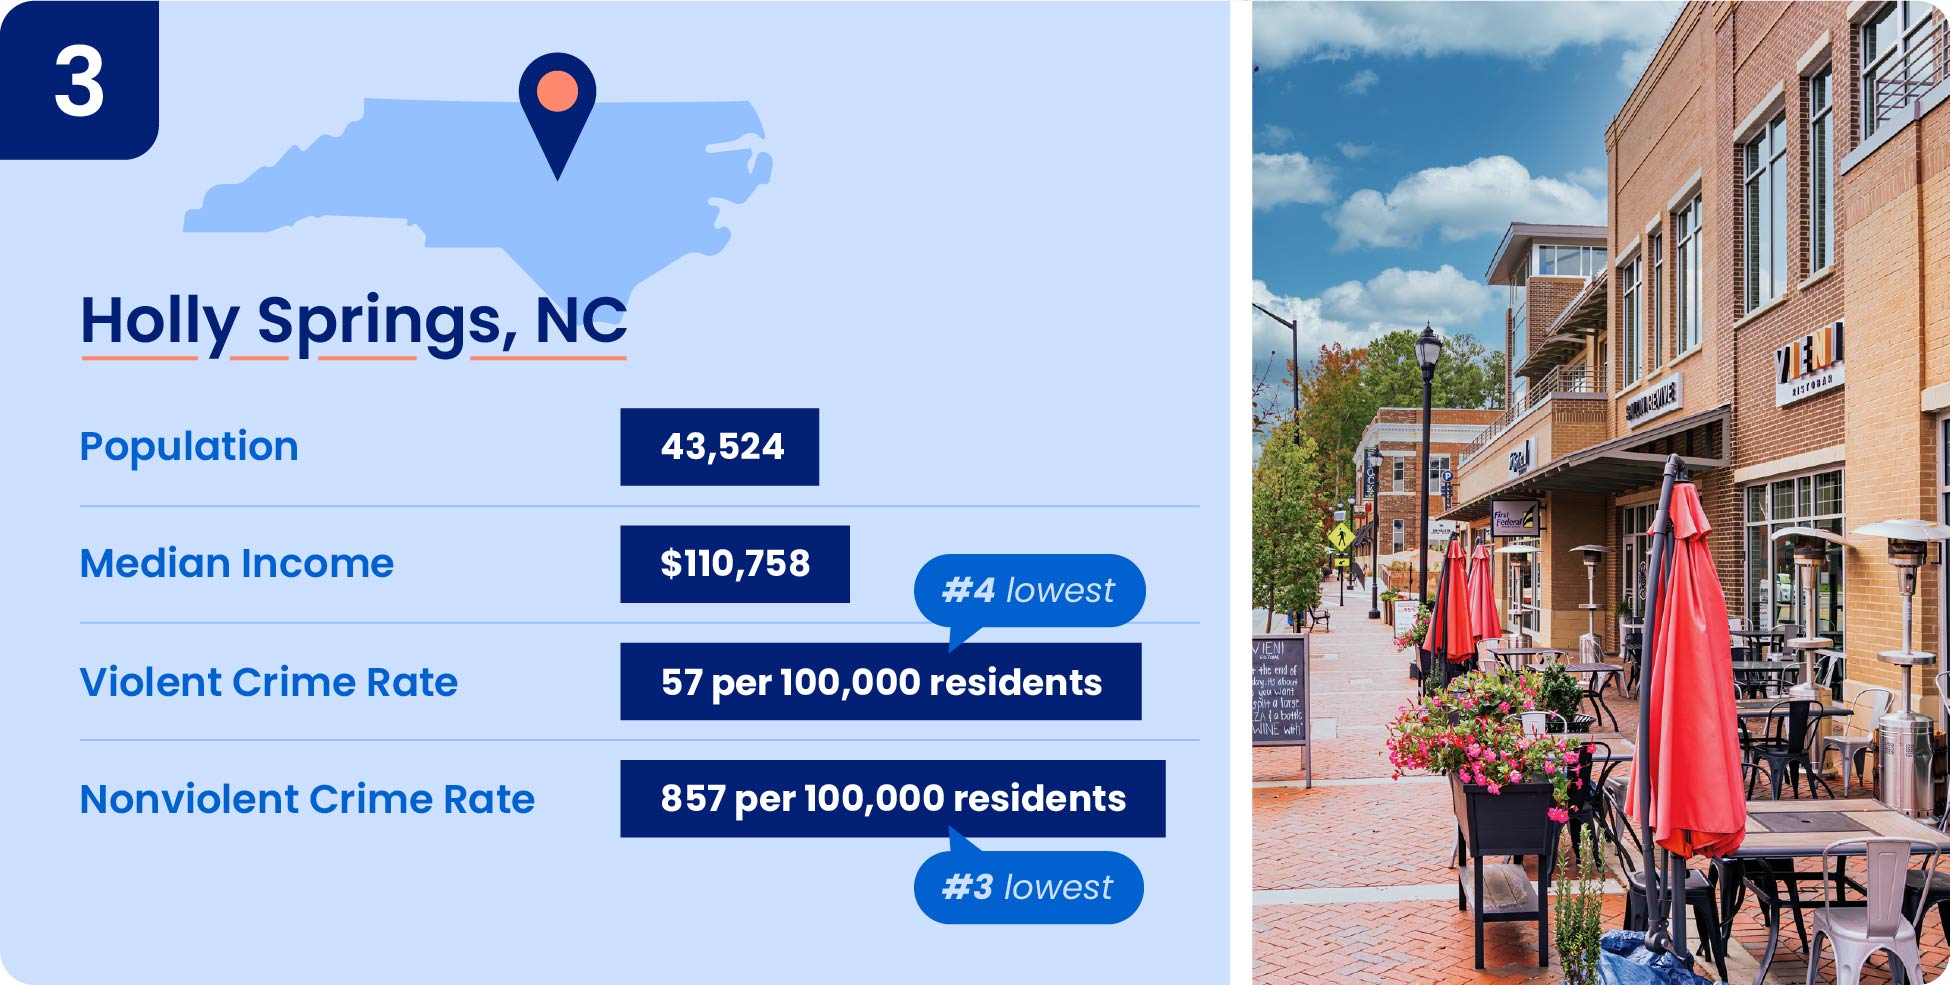 Holly Springs NC is one of the safest cities in North Carolina